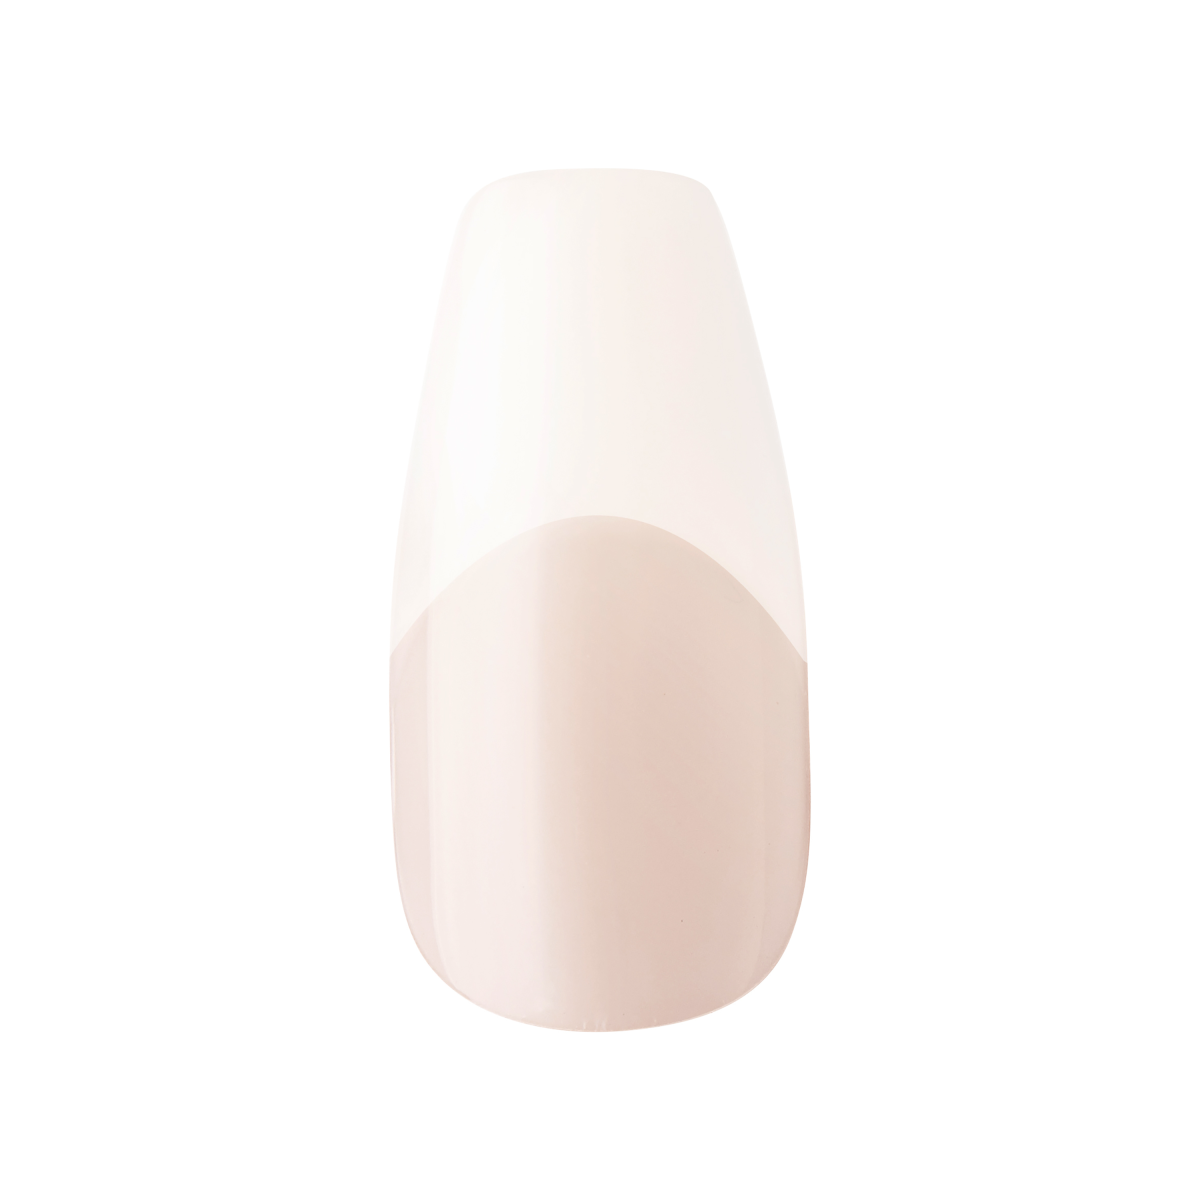 KISS Salon Acrylic, Press-On Nails, Leilani, Nude, Med Coffin, 28ct